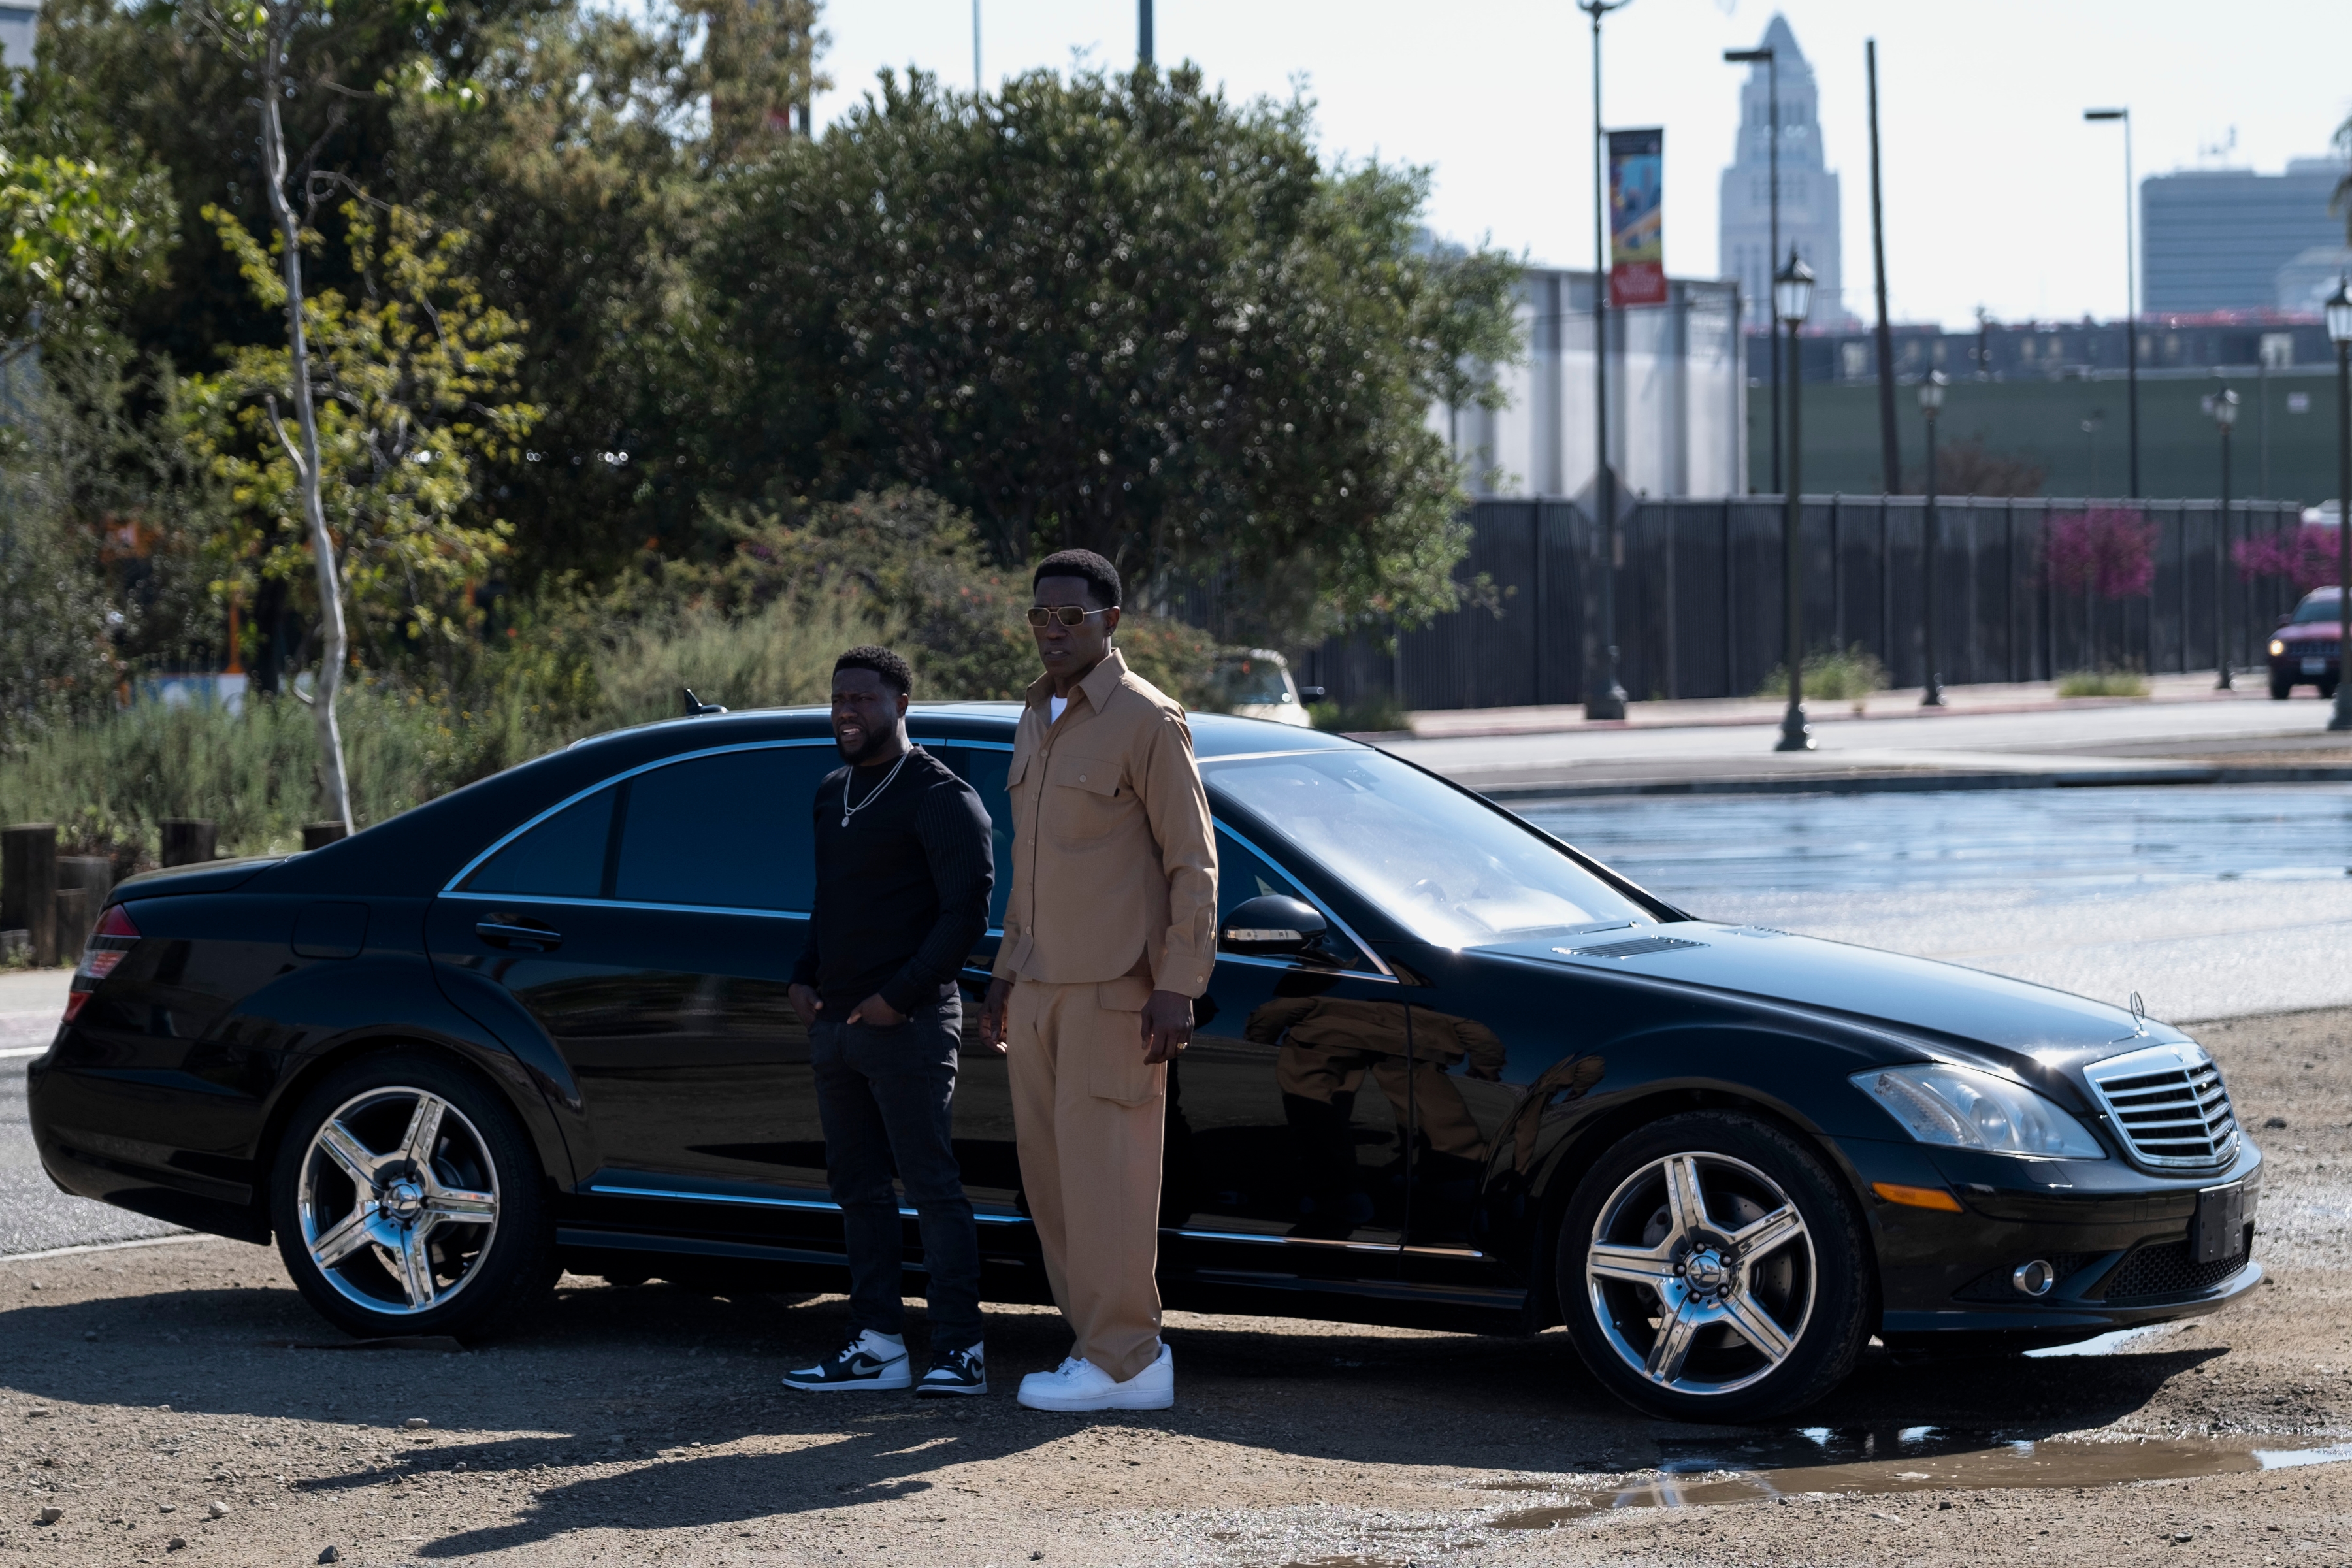 Kevin Hart and Wesley Snipes star in 'True Story' for Netflix